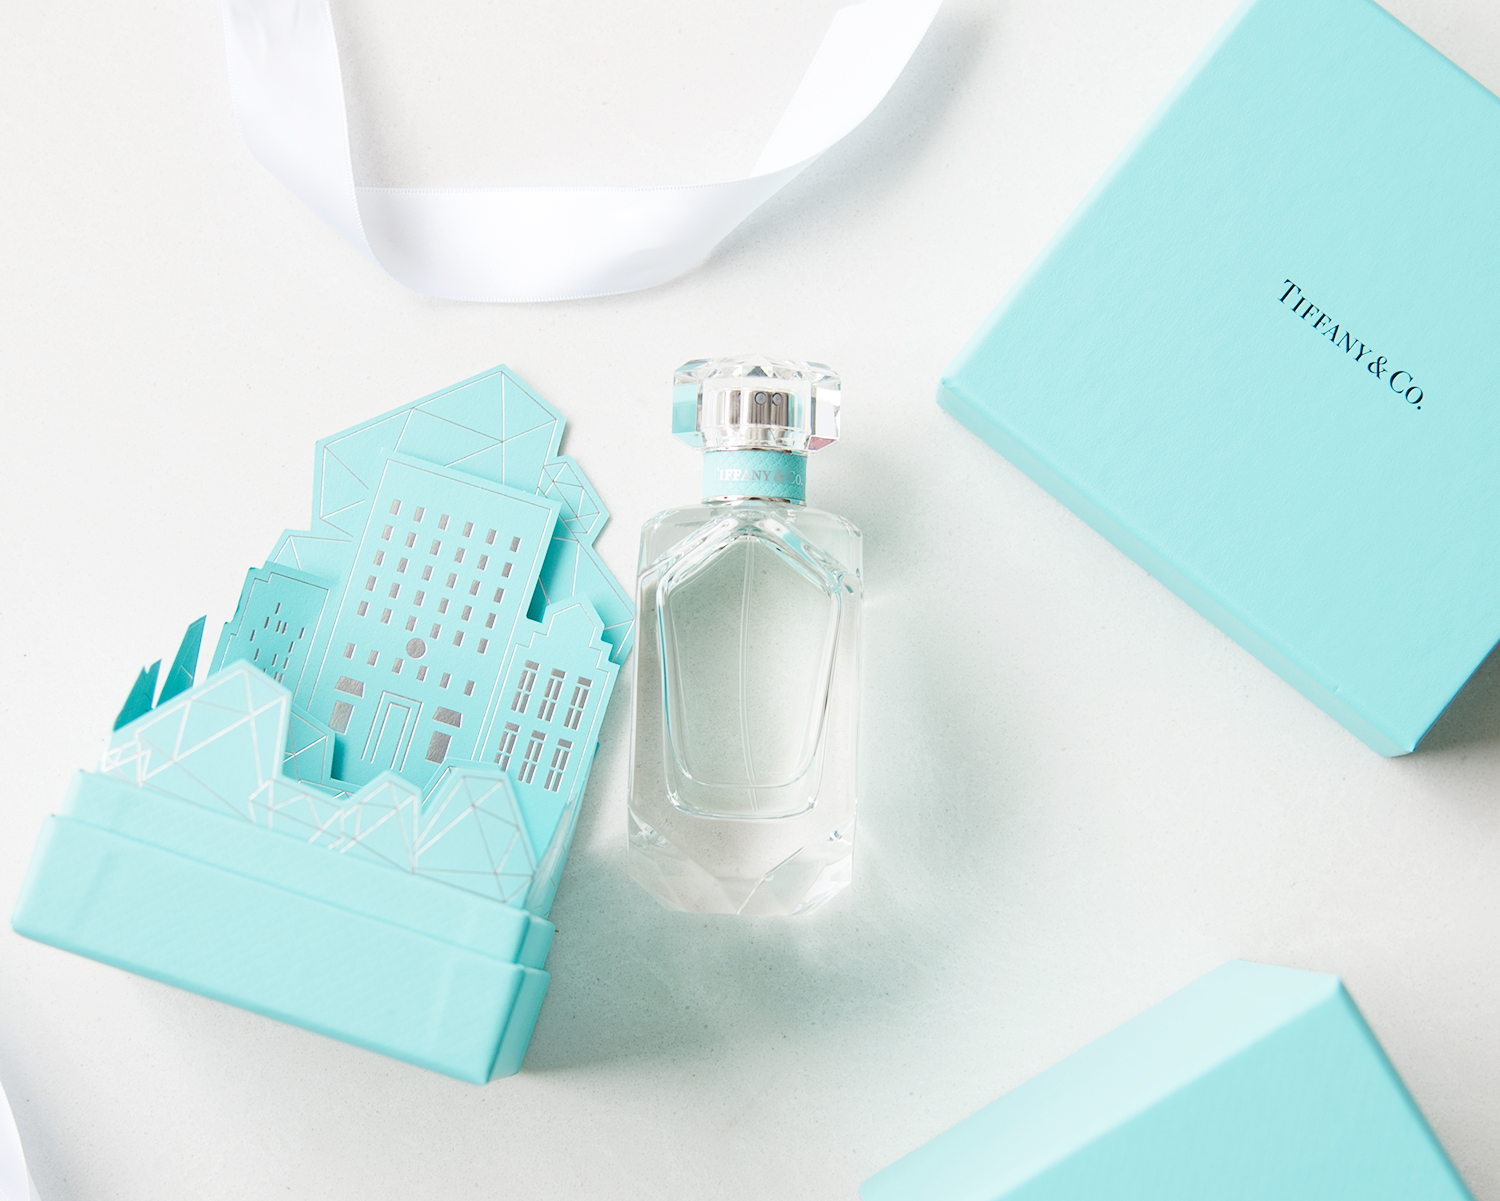 tiffany and co limited edition